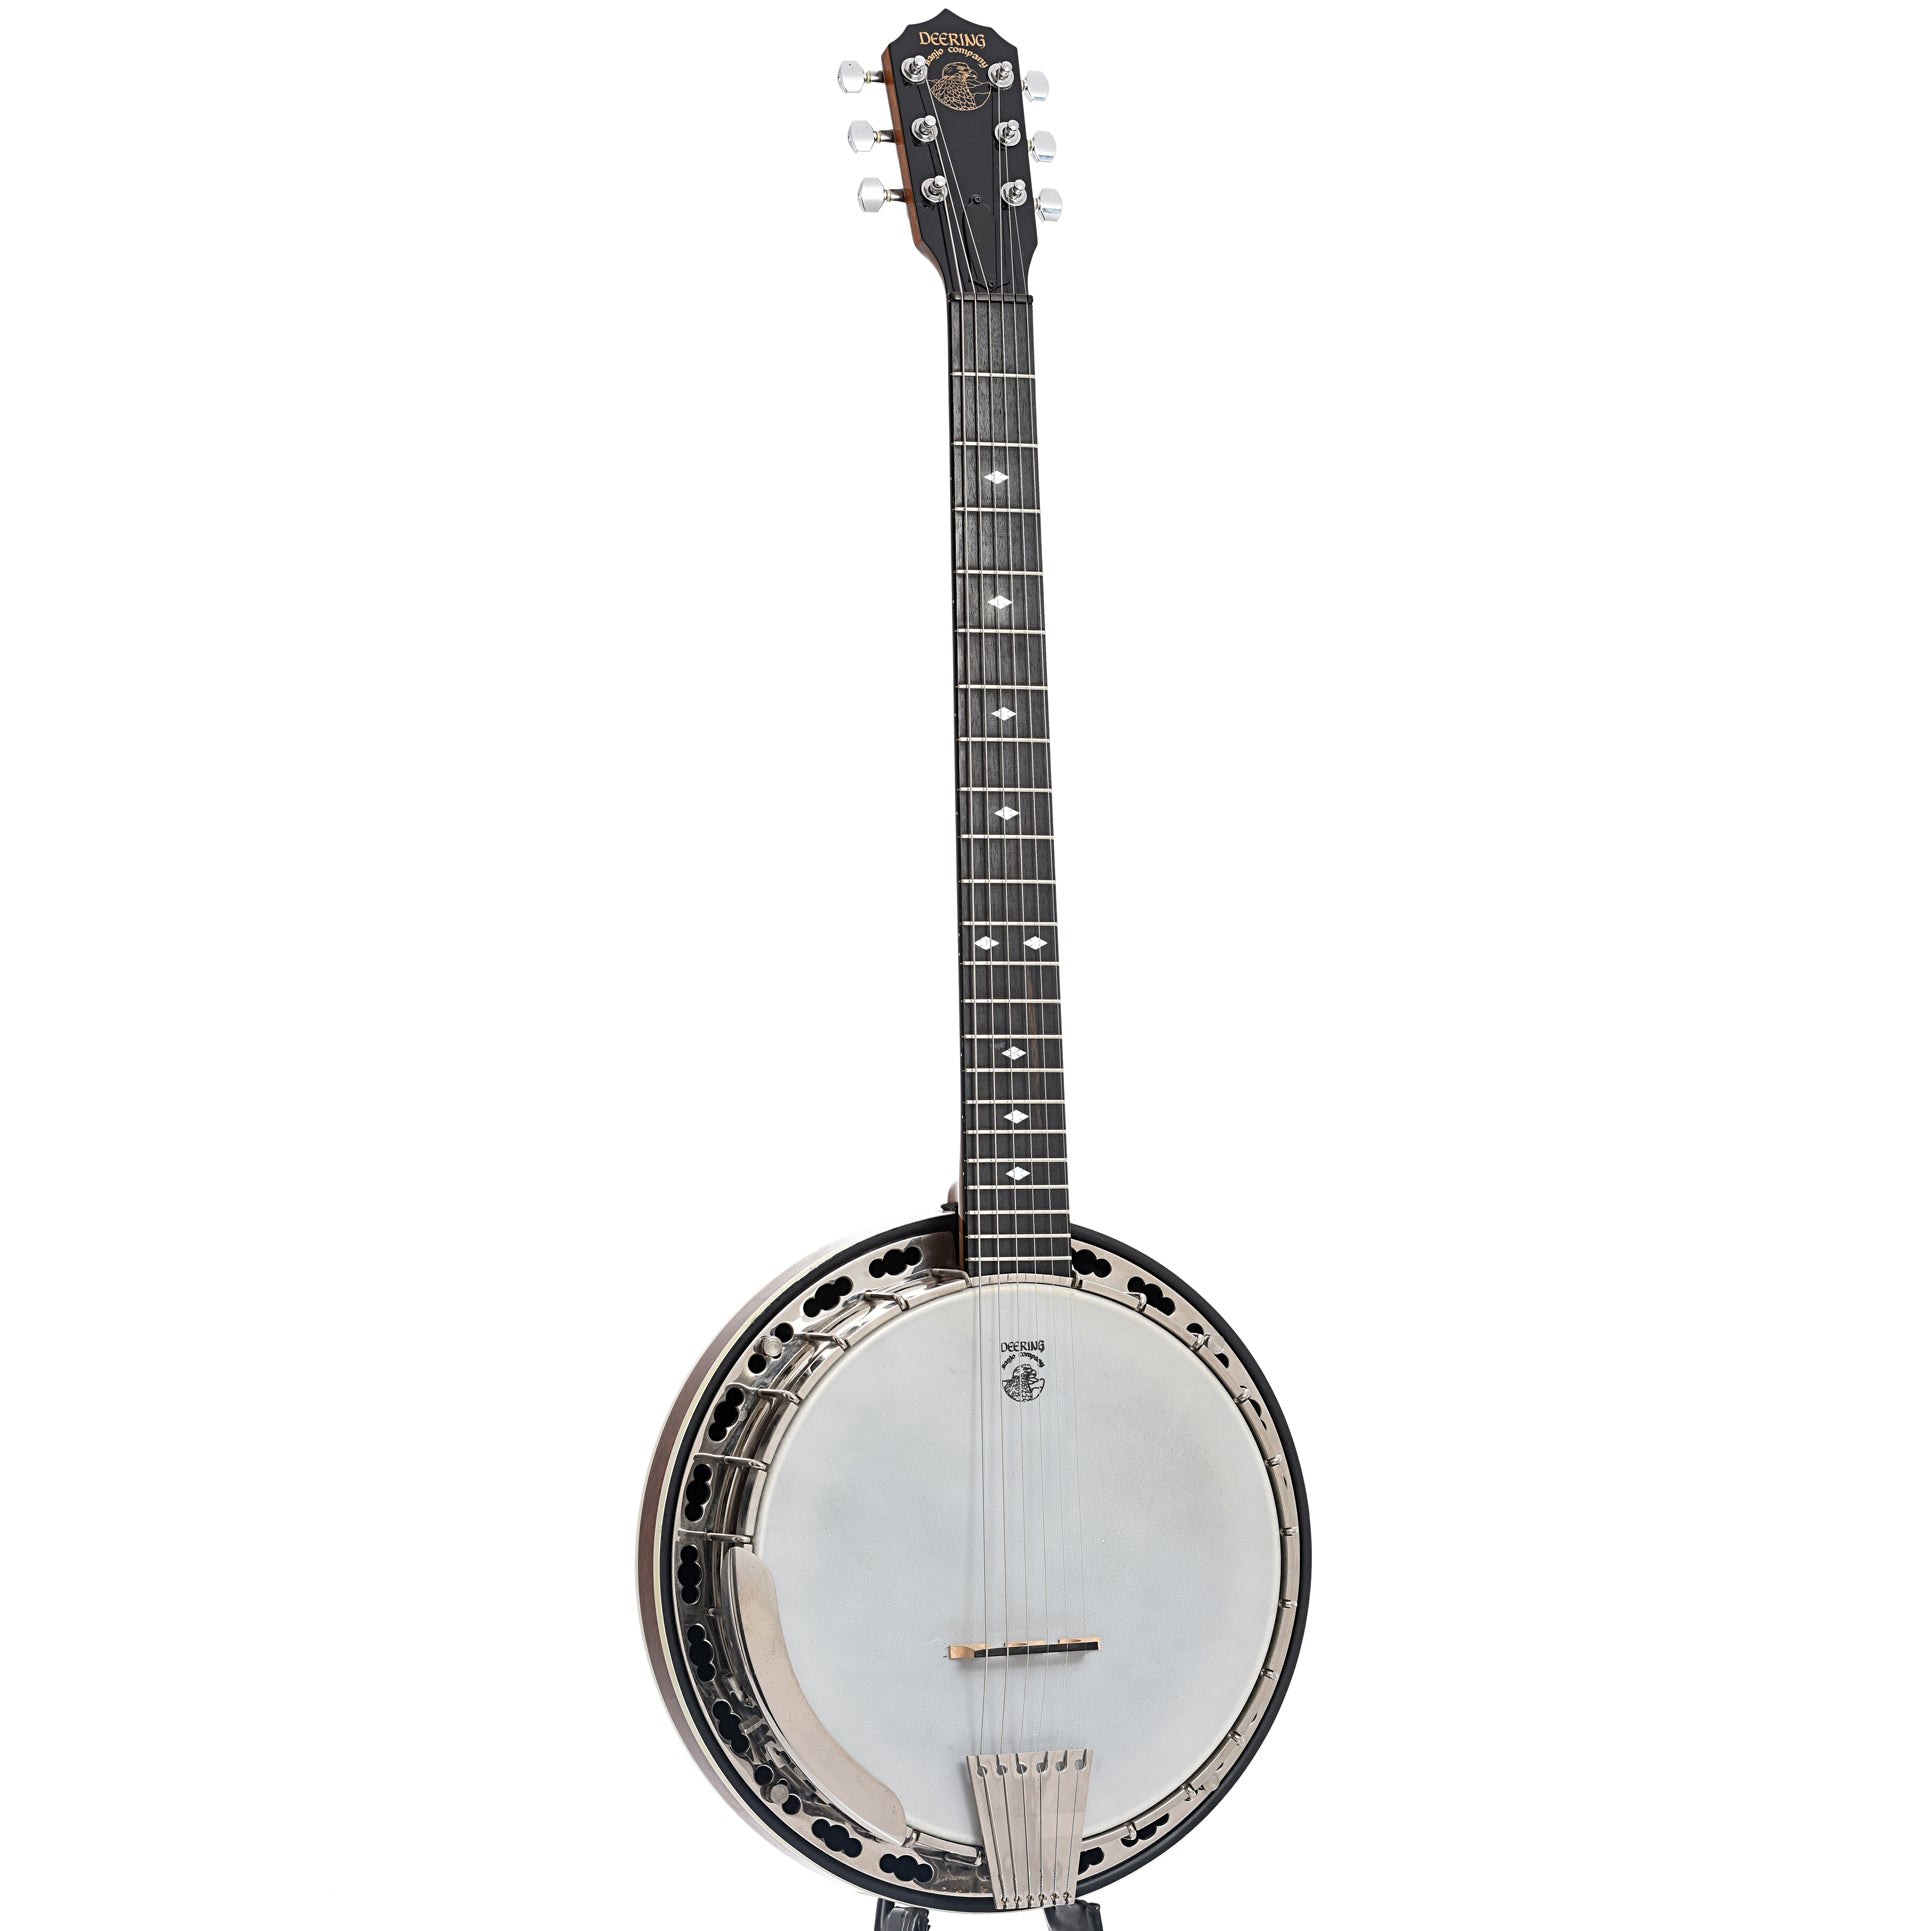 Full front and side of Deering Deluxe 6 Banjo-Guitar (2006)